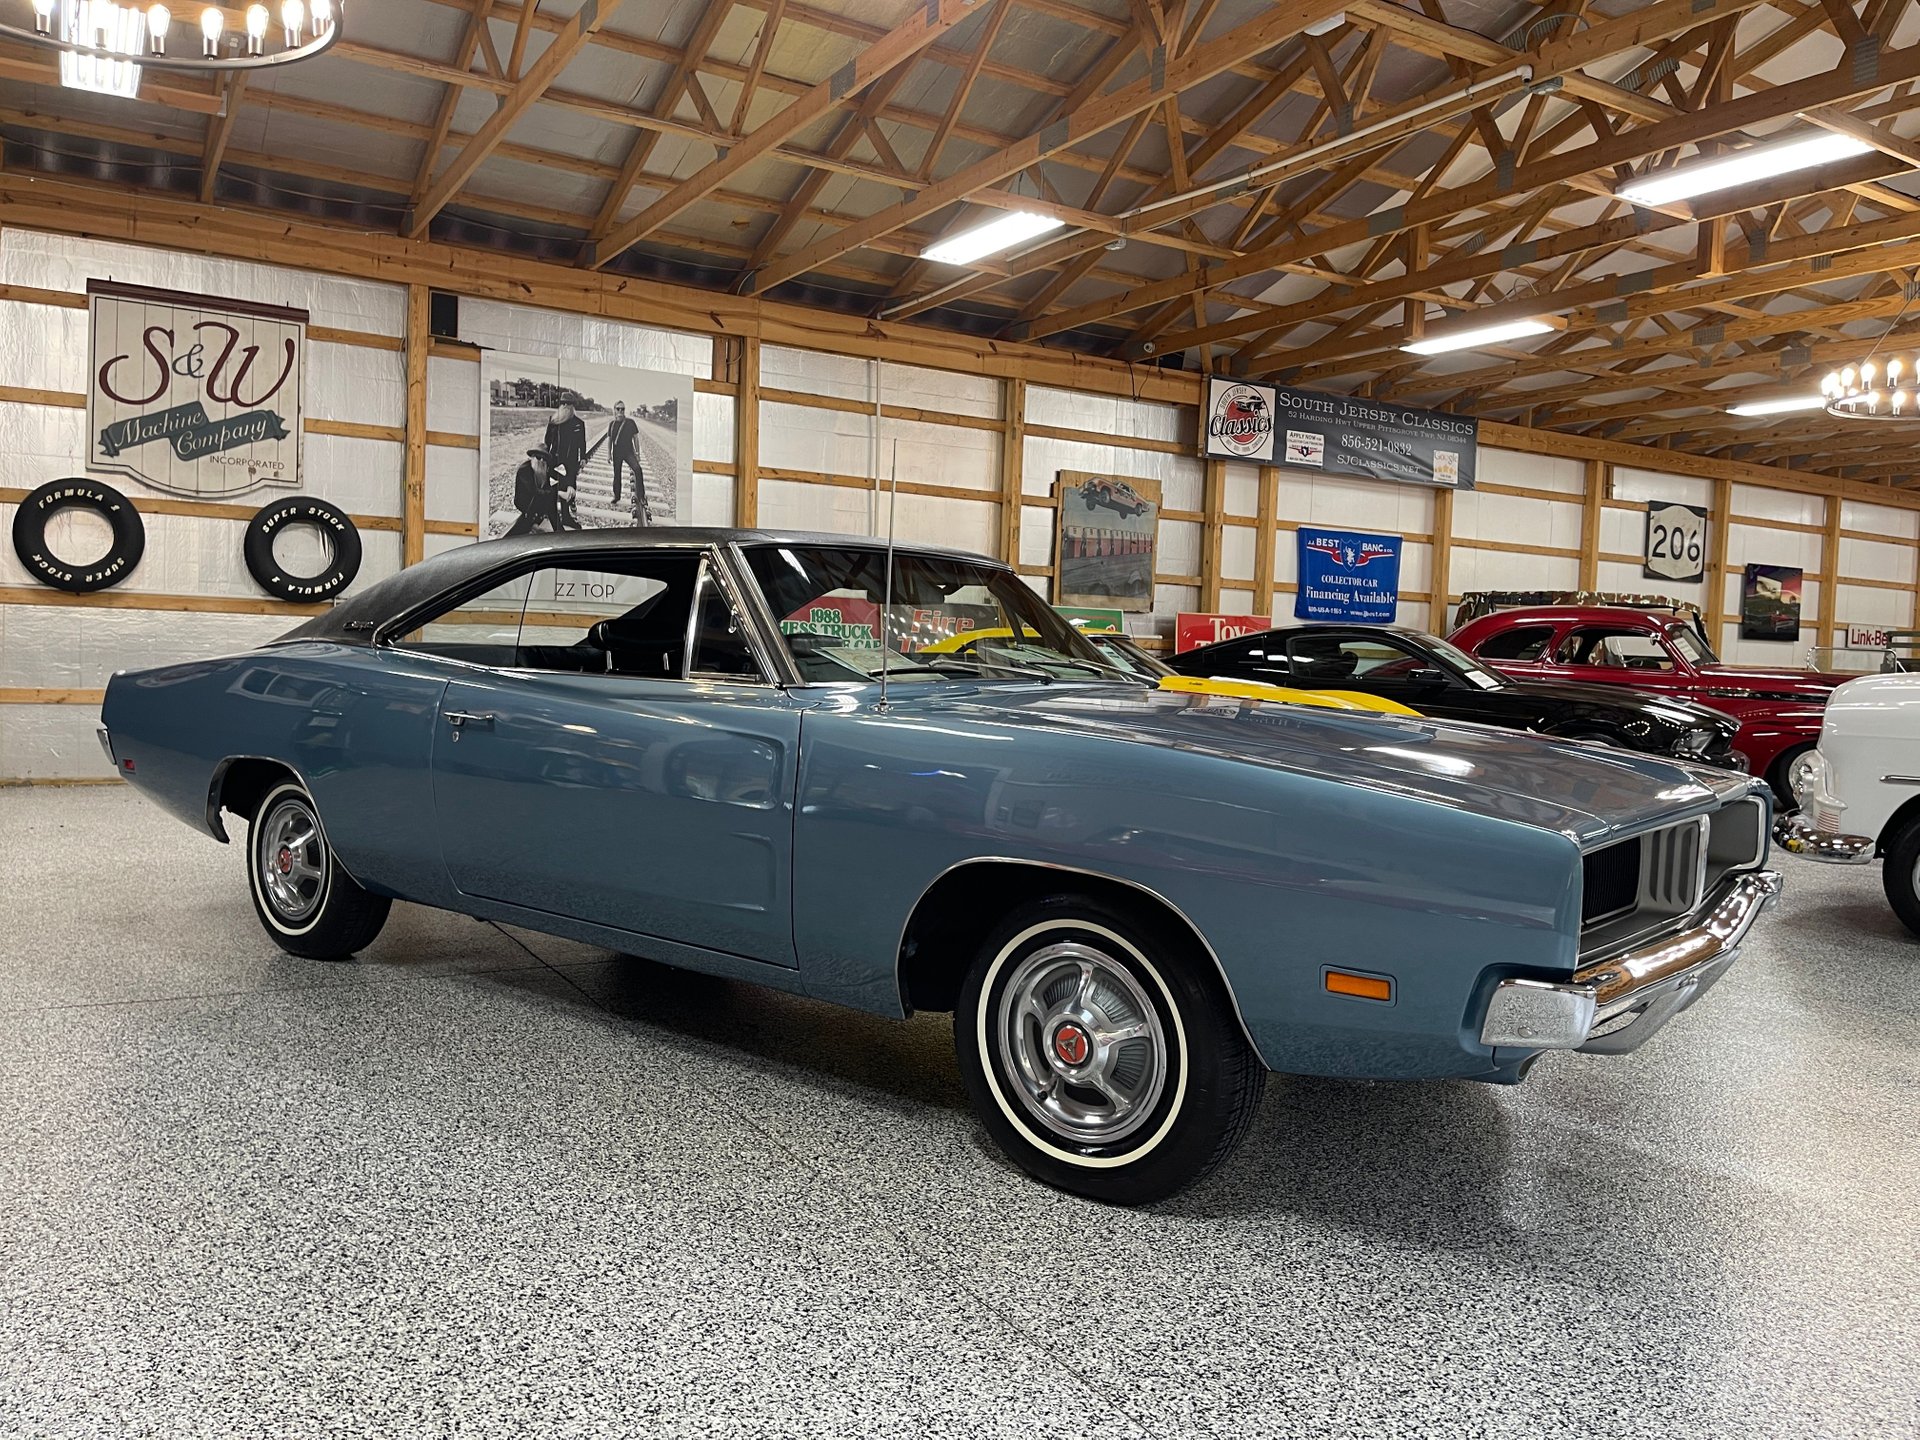 1969 Dodge Charger | South Jersey Classics